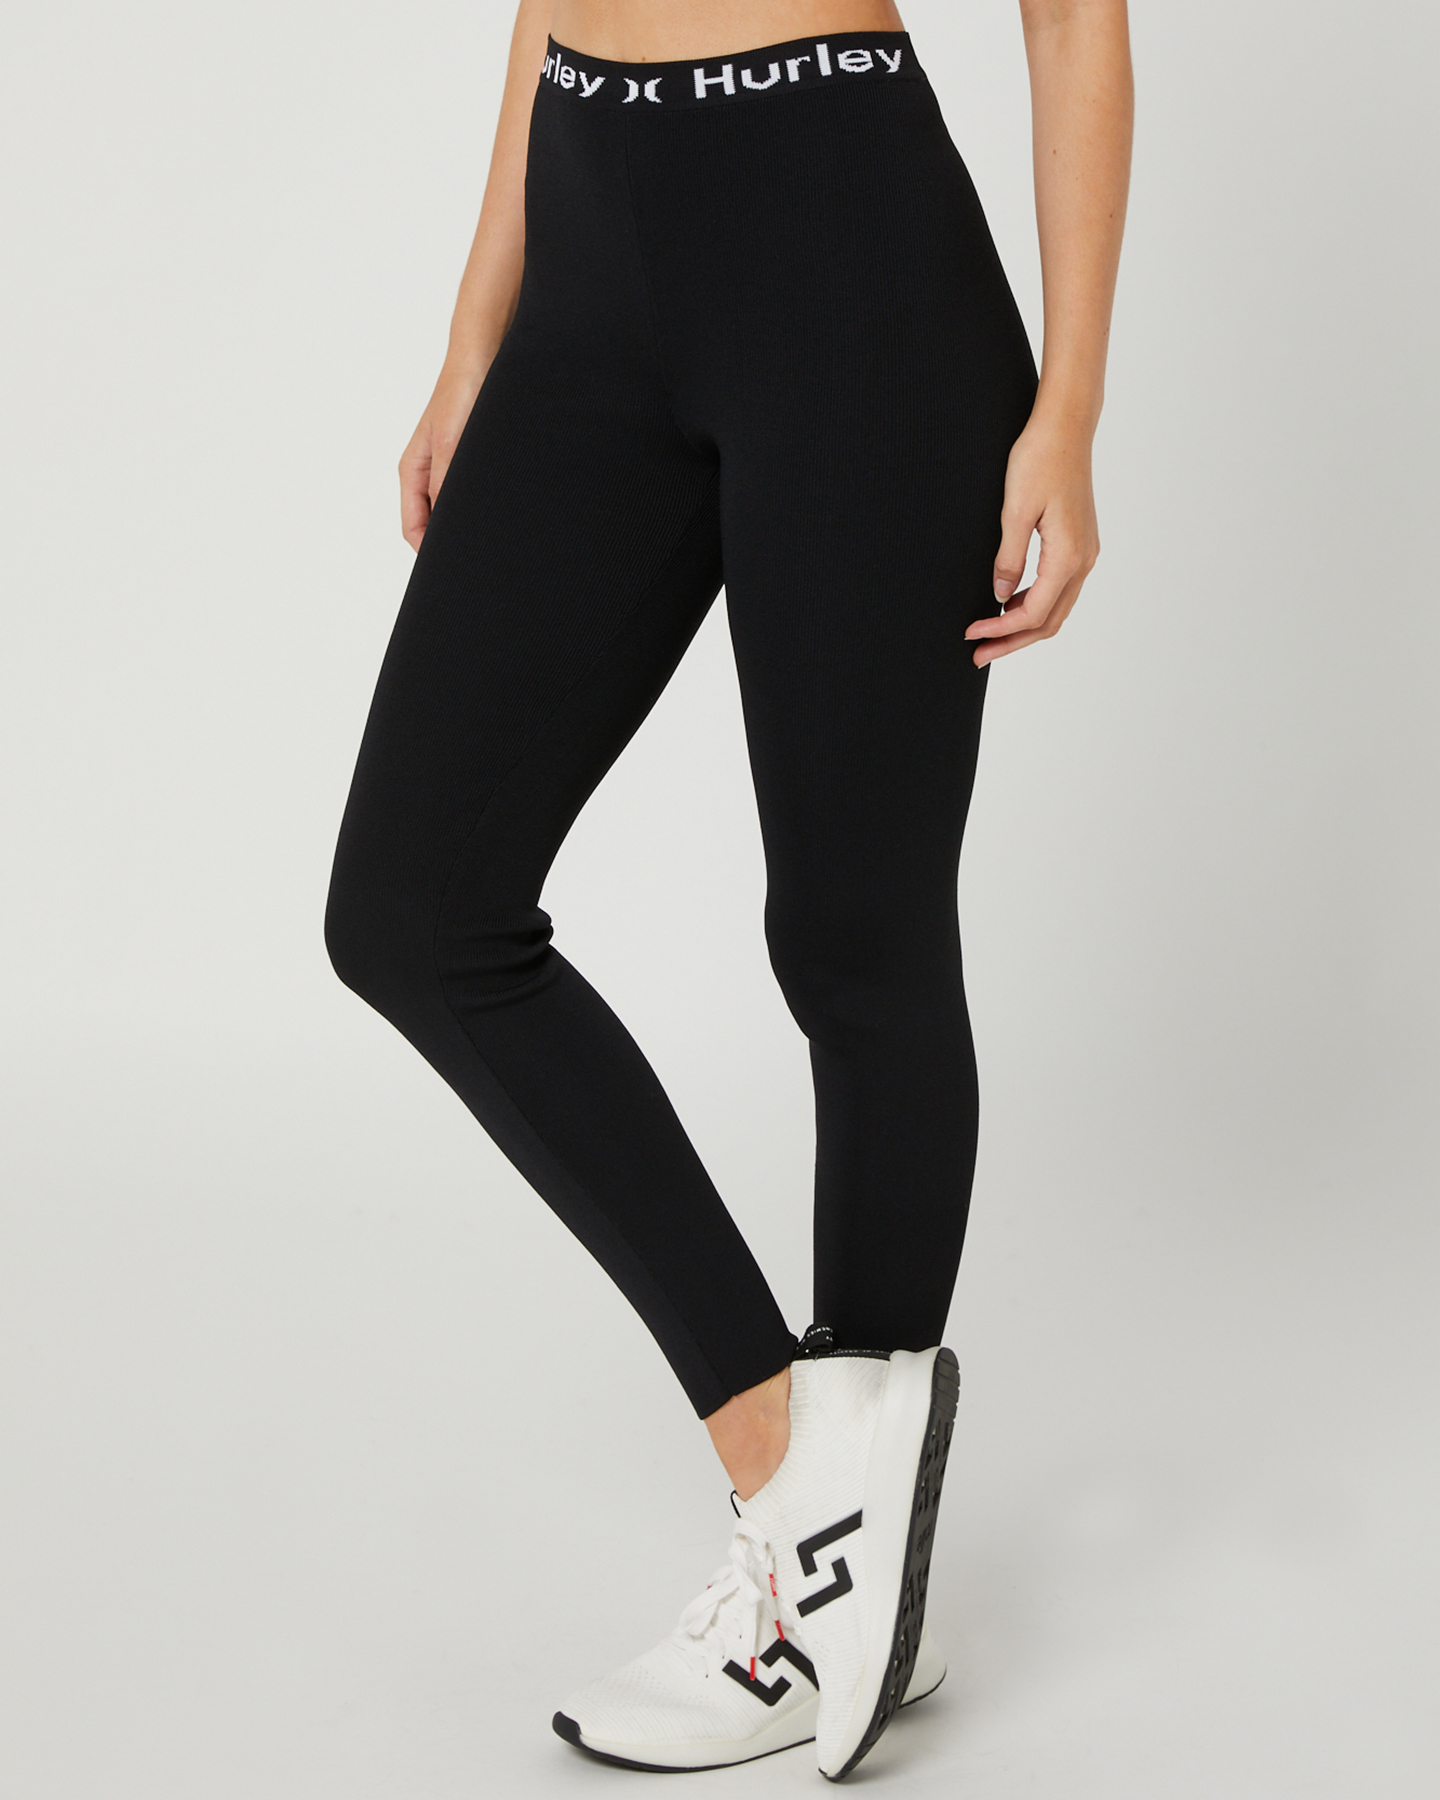 Hurley Oao Text Active Legging - Black | SurfStitch